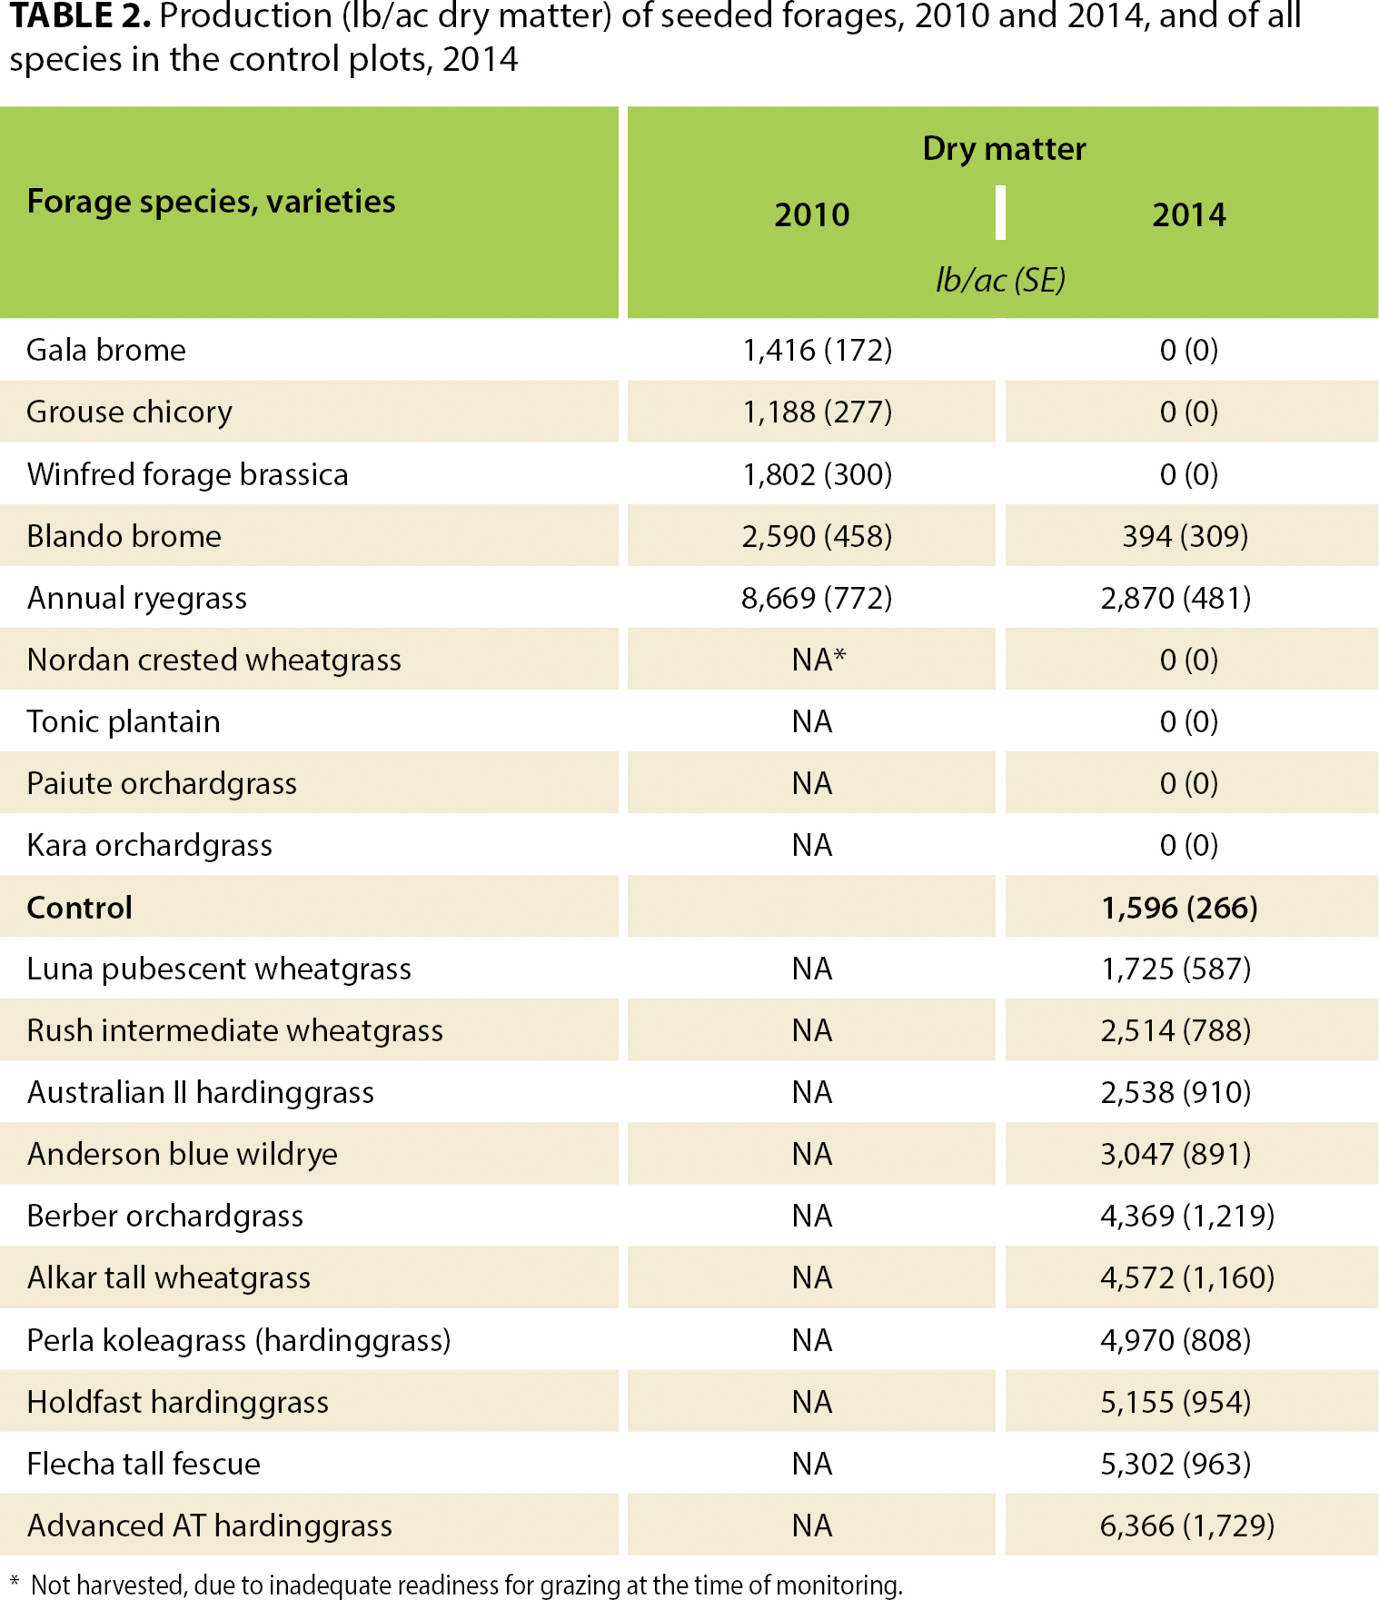 Production (lb/ac dry matter) of seeded forages, 2010 and 2014, and of all species in the control plots, 2014